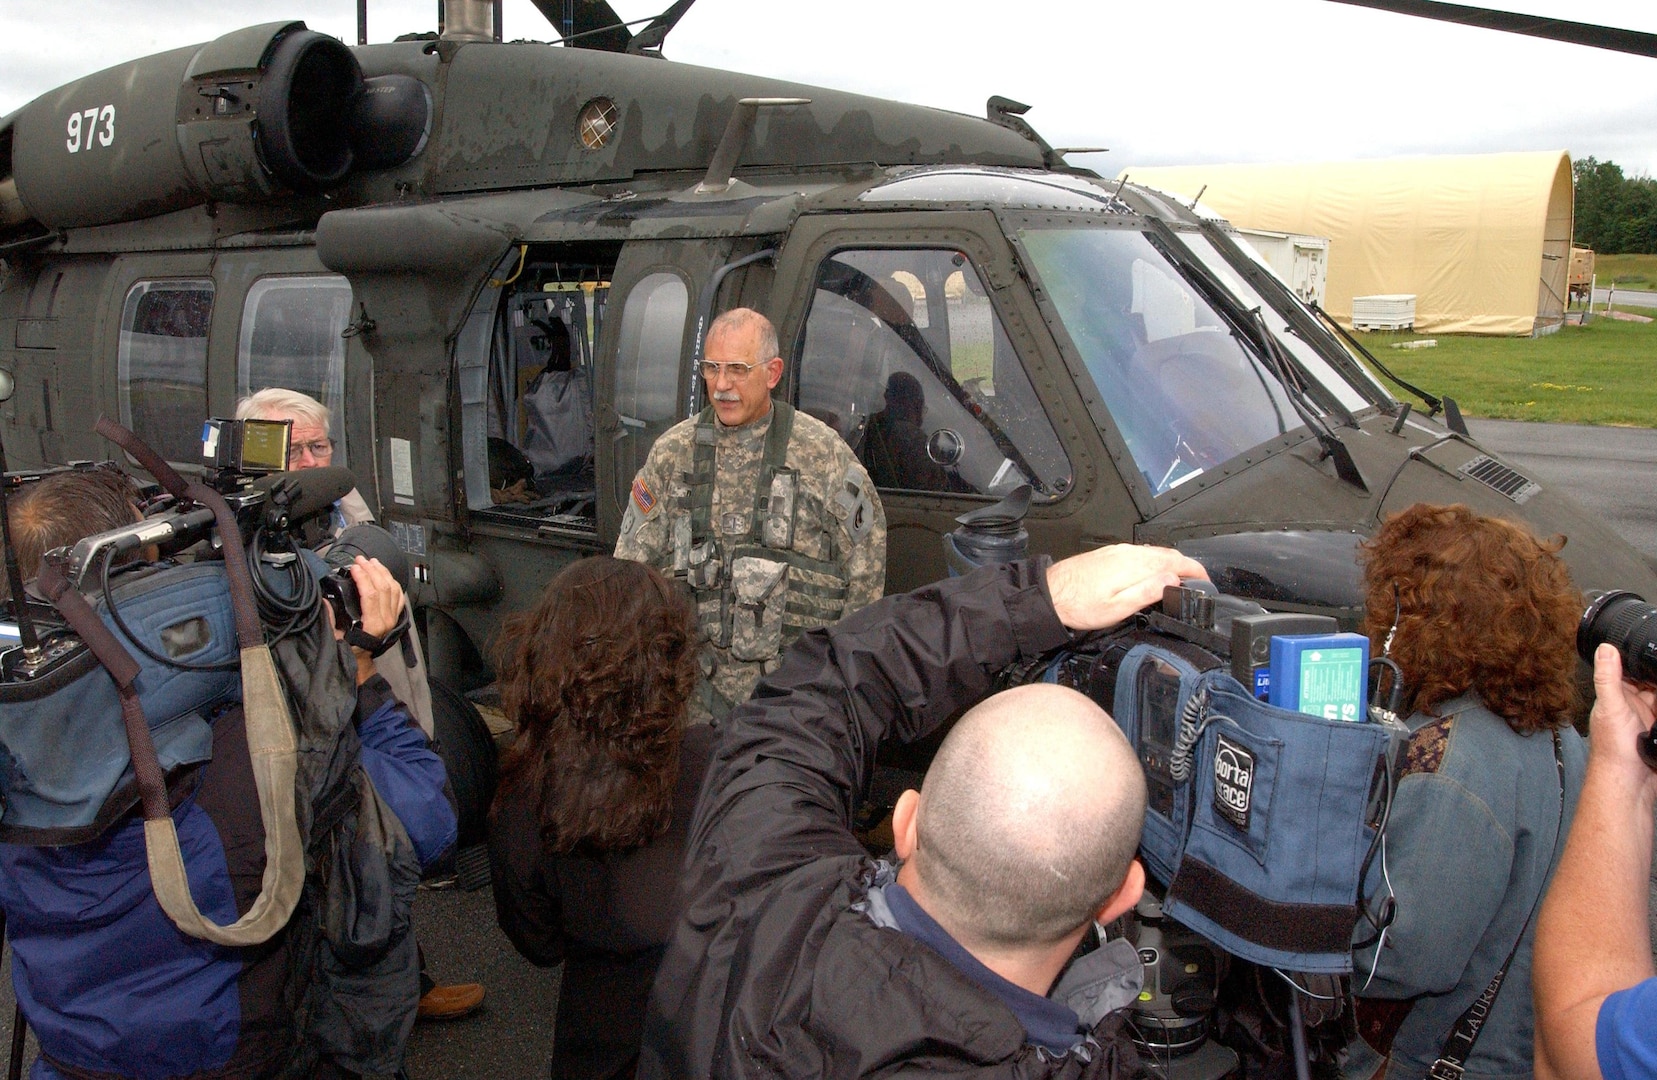 Army Chief Warrant Officer Steven Derry, the last Vietnam-era helicopter pilot in the New York Army National Guard, speaks to members of the Albany press corps following his last official flight as an Army aviation pilot on June 14, 2011. Derry, a member of 3rd Battalion, 142nd Assault Helicopter Battalion, started training as a pilot in 1969 and served in Vietnam in 1970 to 1971.